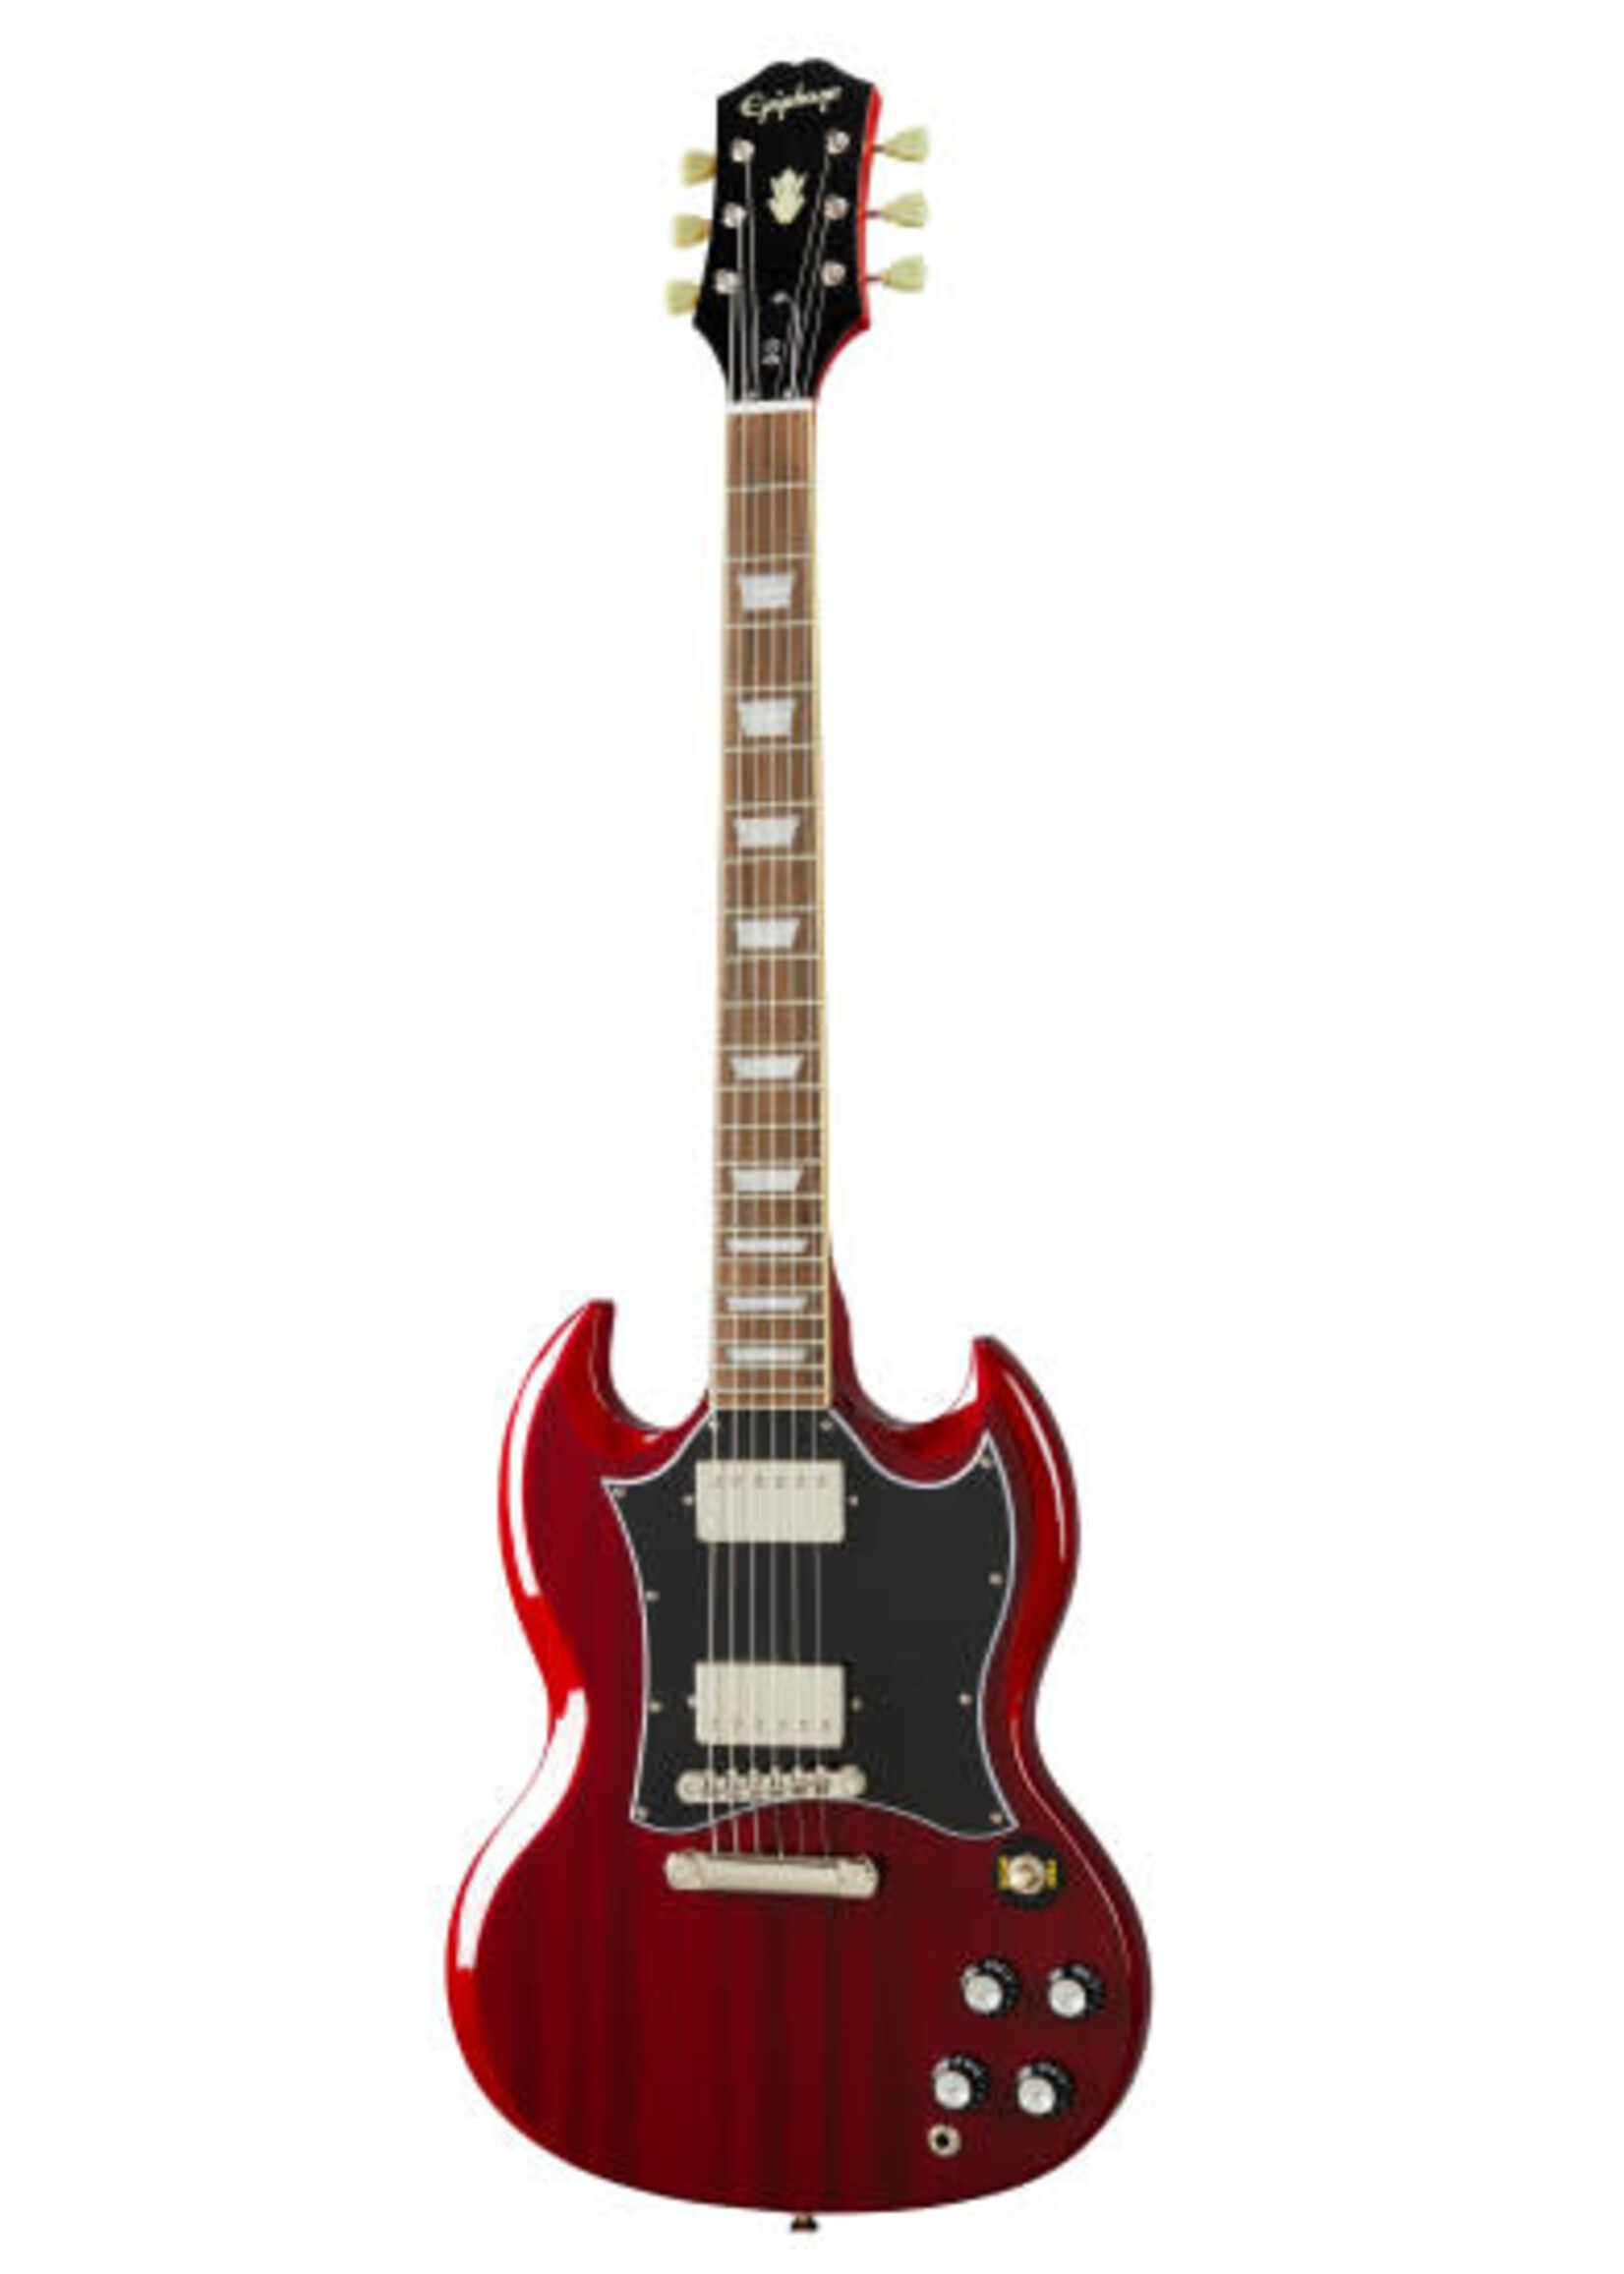 Epiphone Epiphone EISSBCHNH1  SG Standard - Heritage Cherry